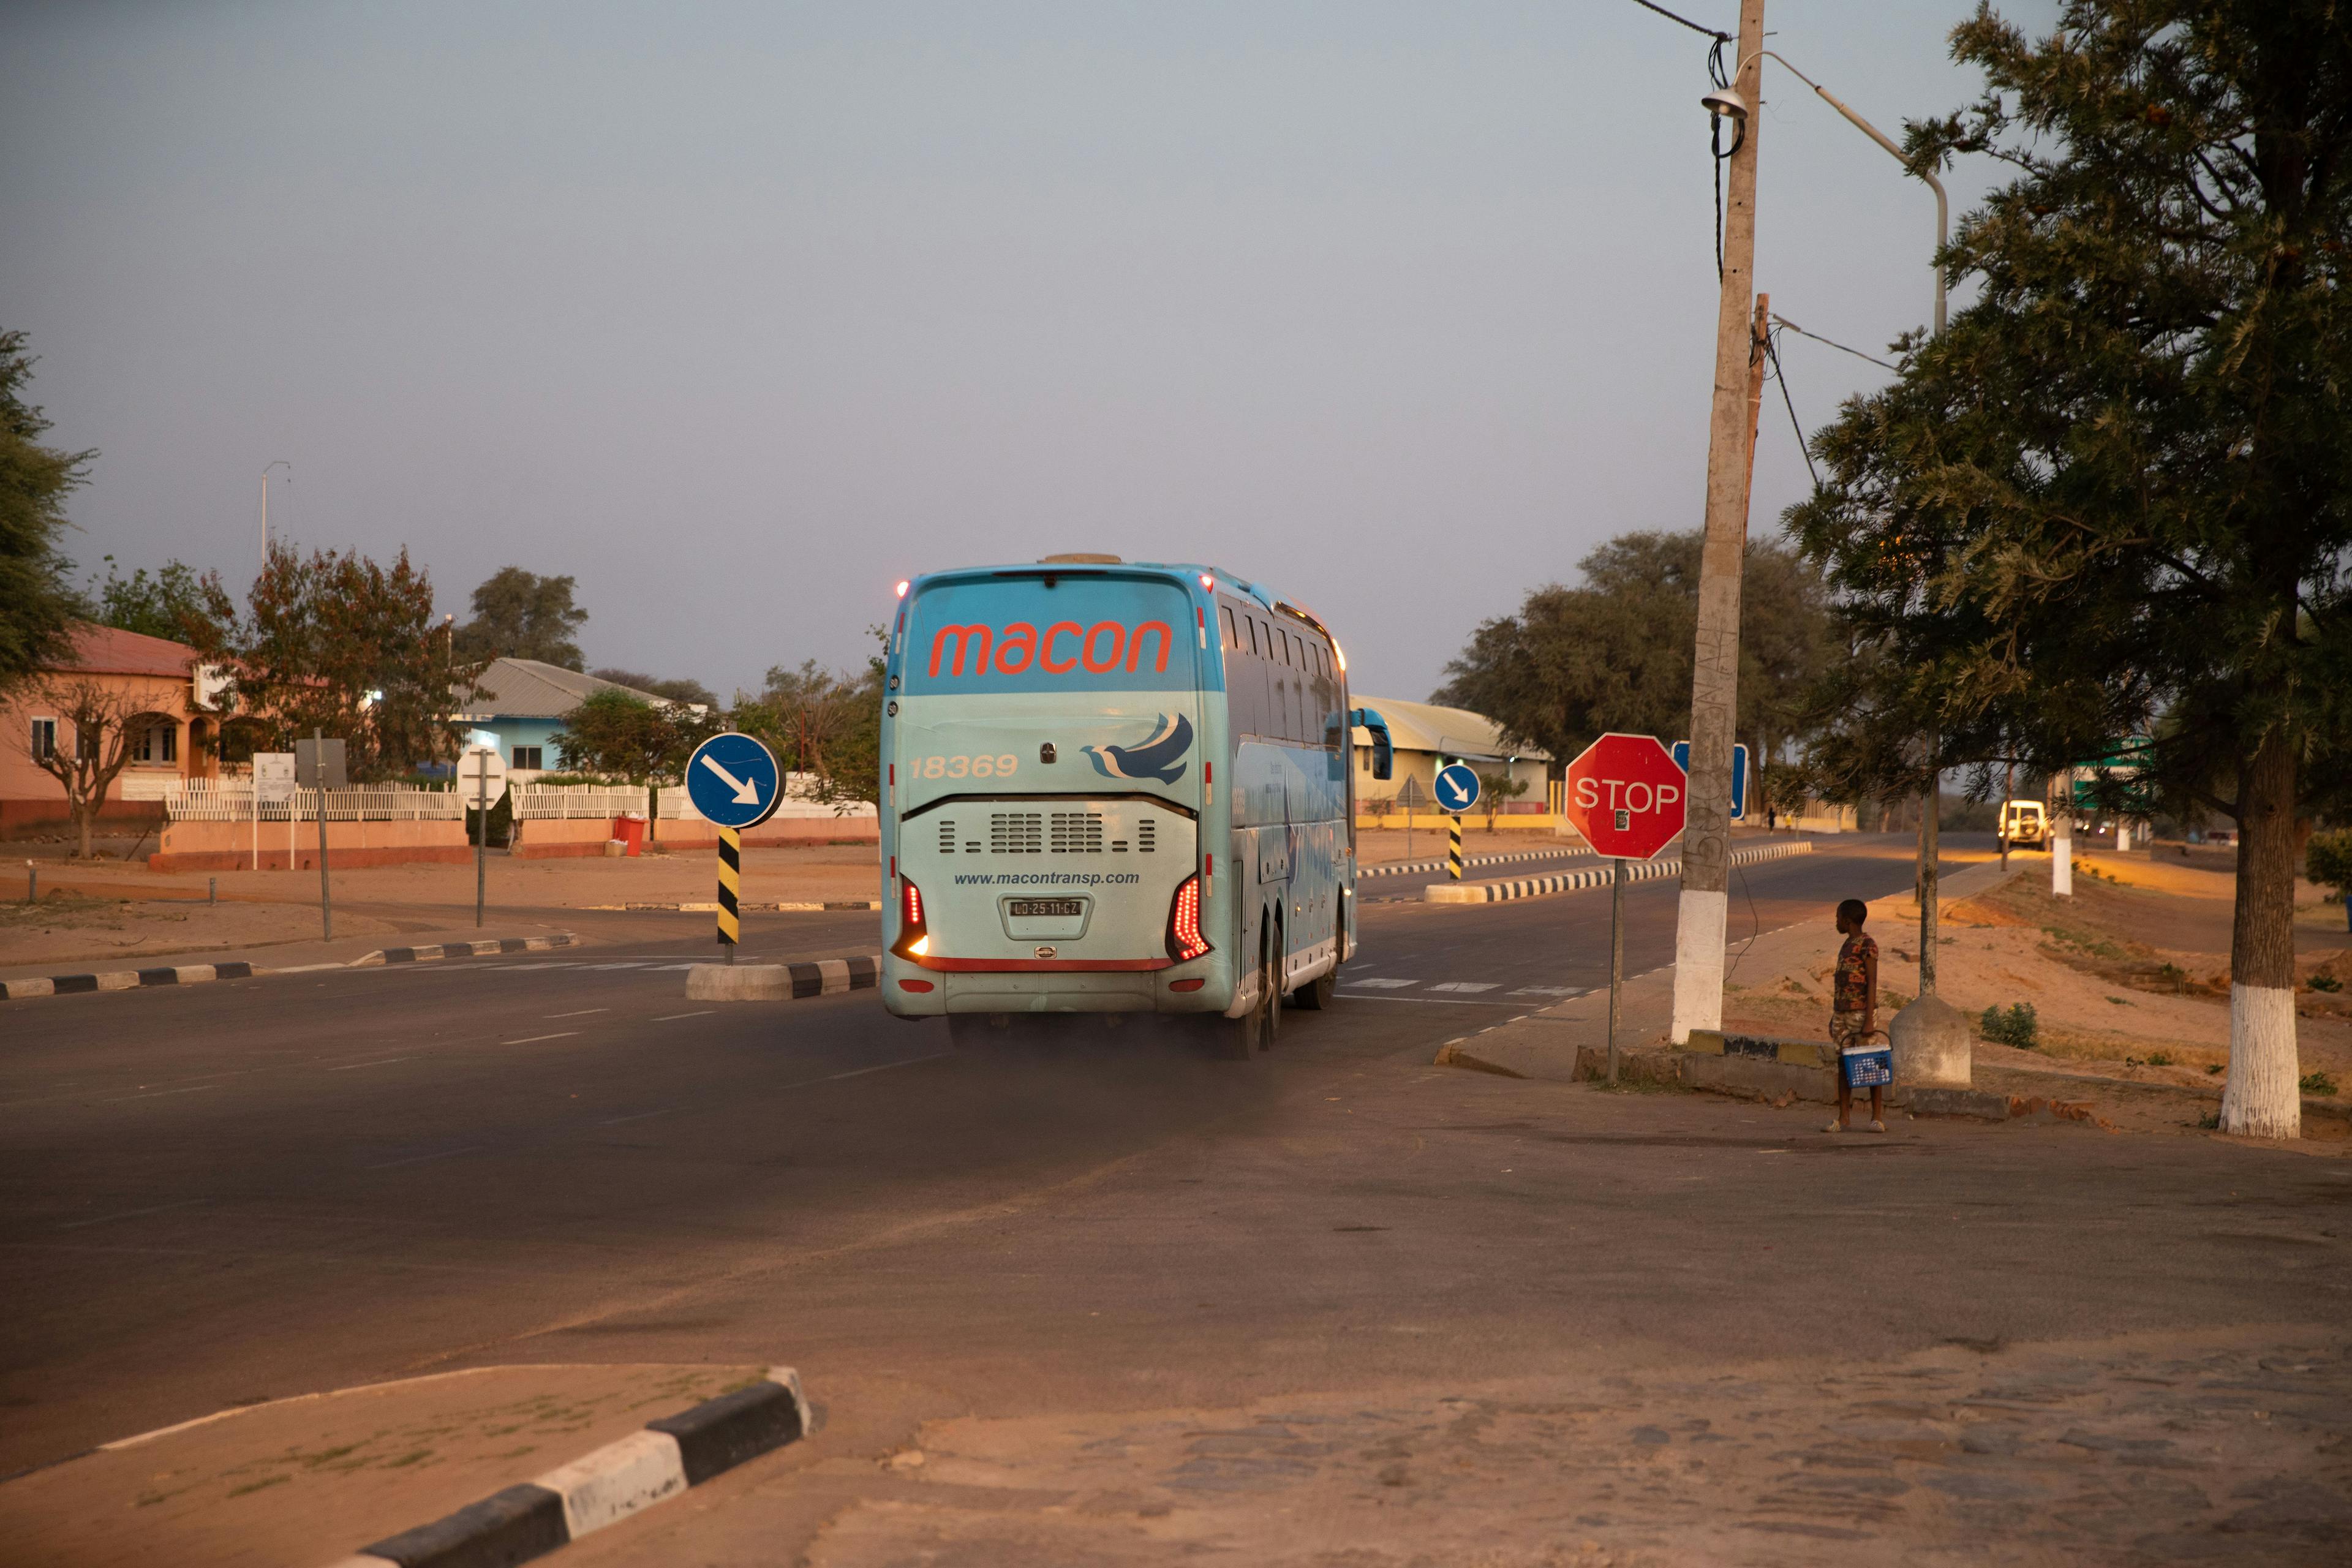 An evening bus pulls away from a gas station. Small cities and towns will be primary destinations for climate mobility. With the right connecting infrastructure and services, stronger rural-urban ties can help local economies flourish. 